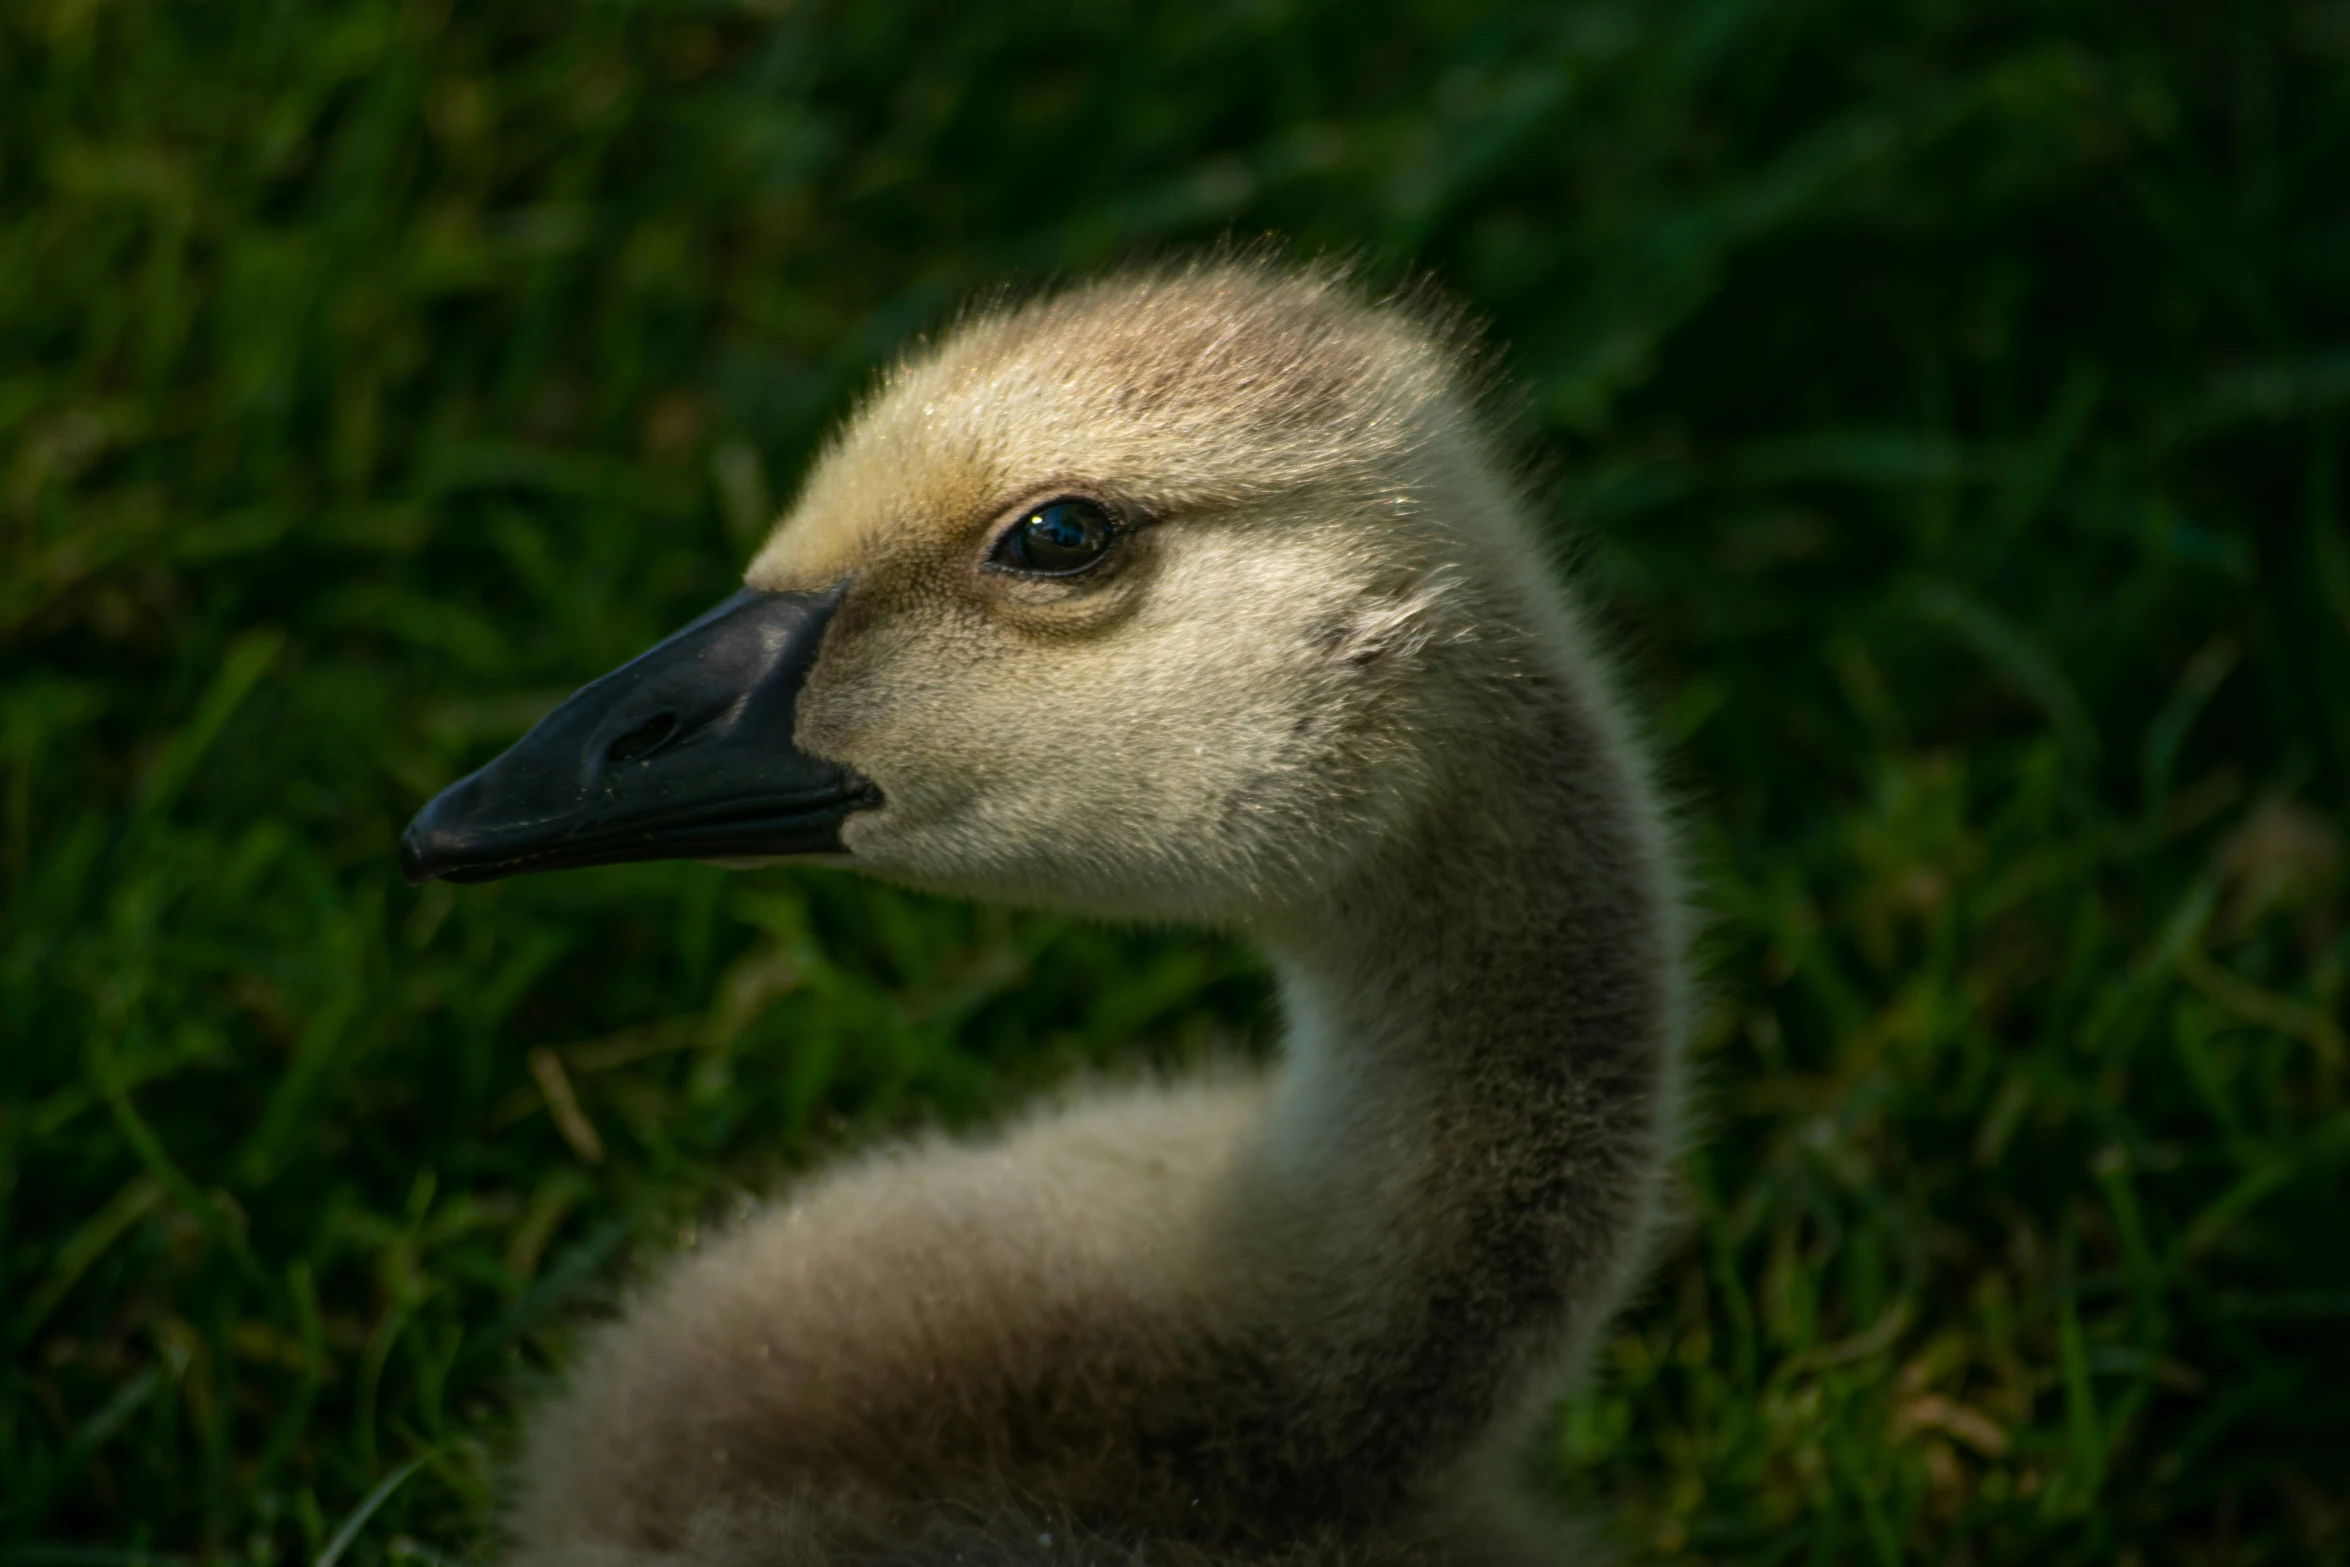 the young duck is looking out into the distance